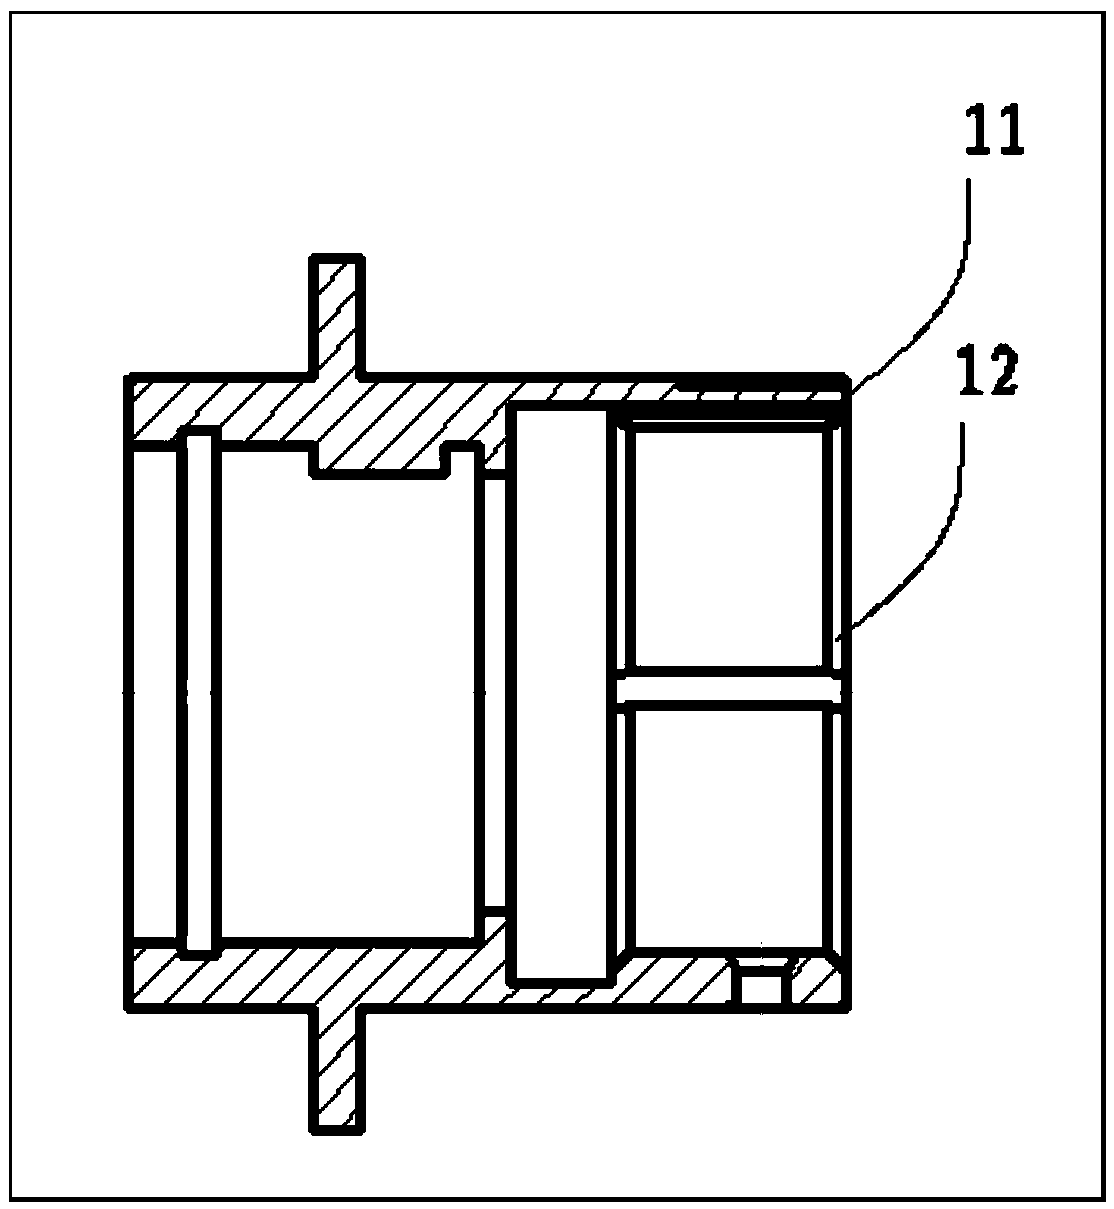 Connector with end-voltage shielding spring sheet structure